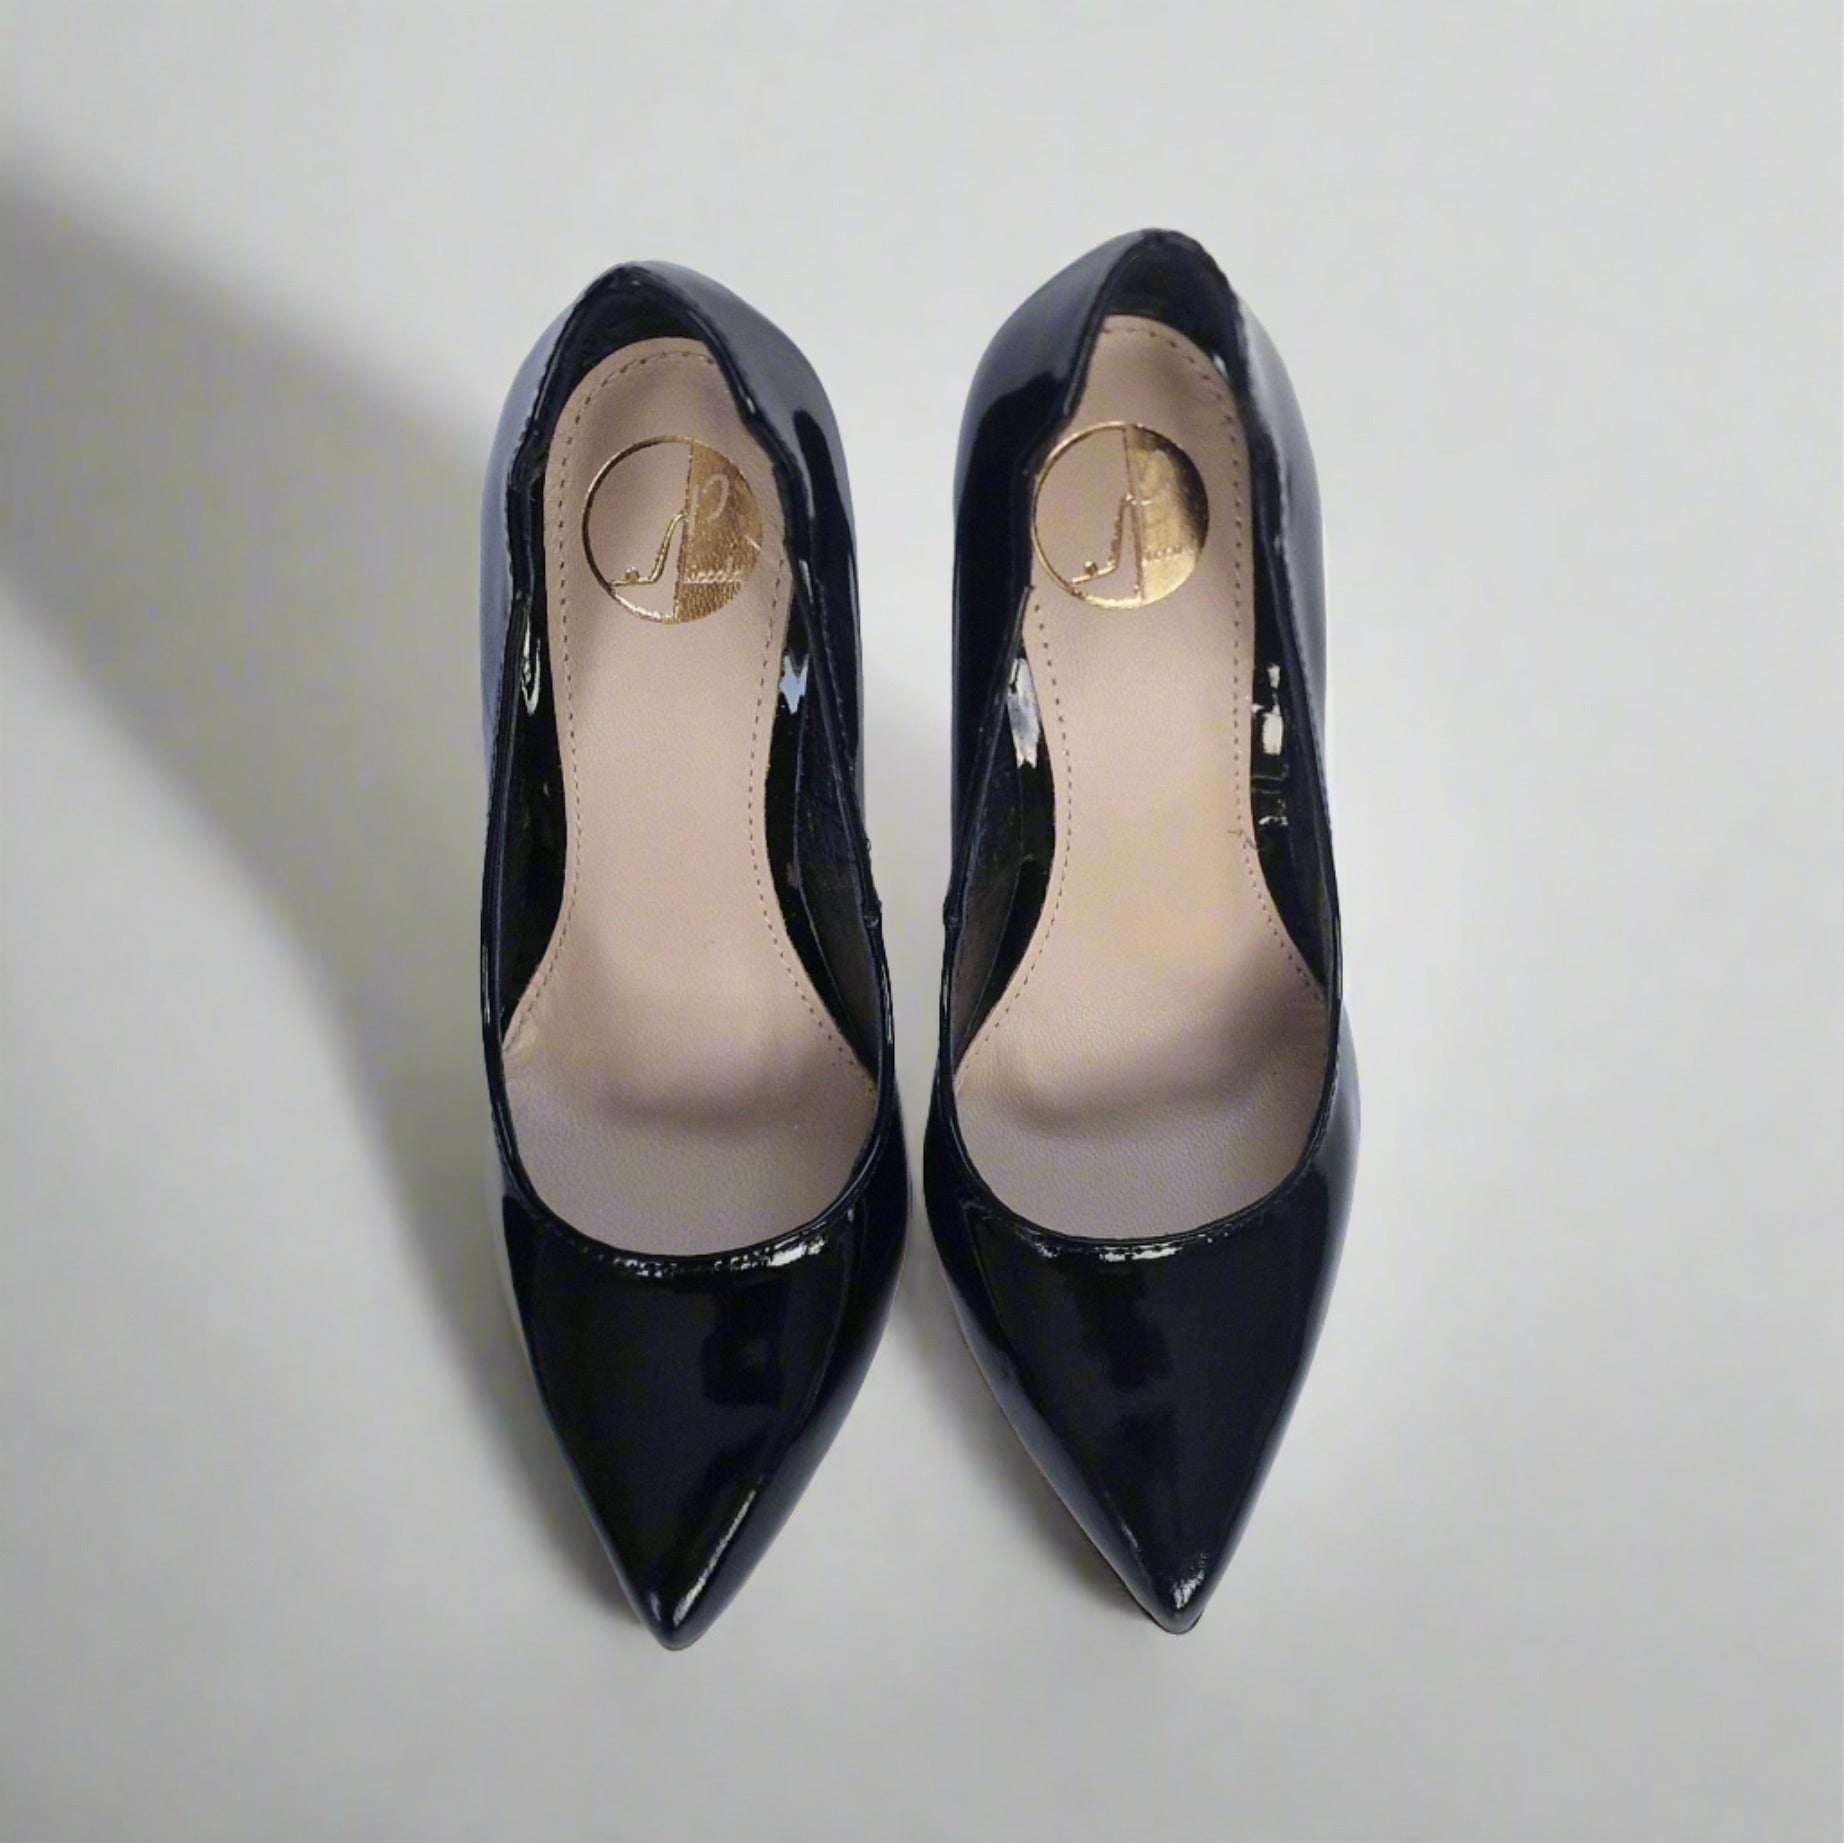 Petite pointed toe court heels in black shiny leather